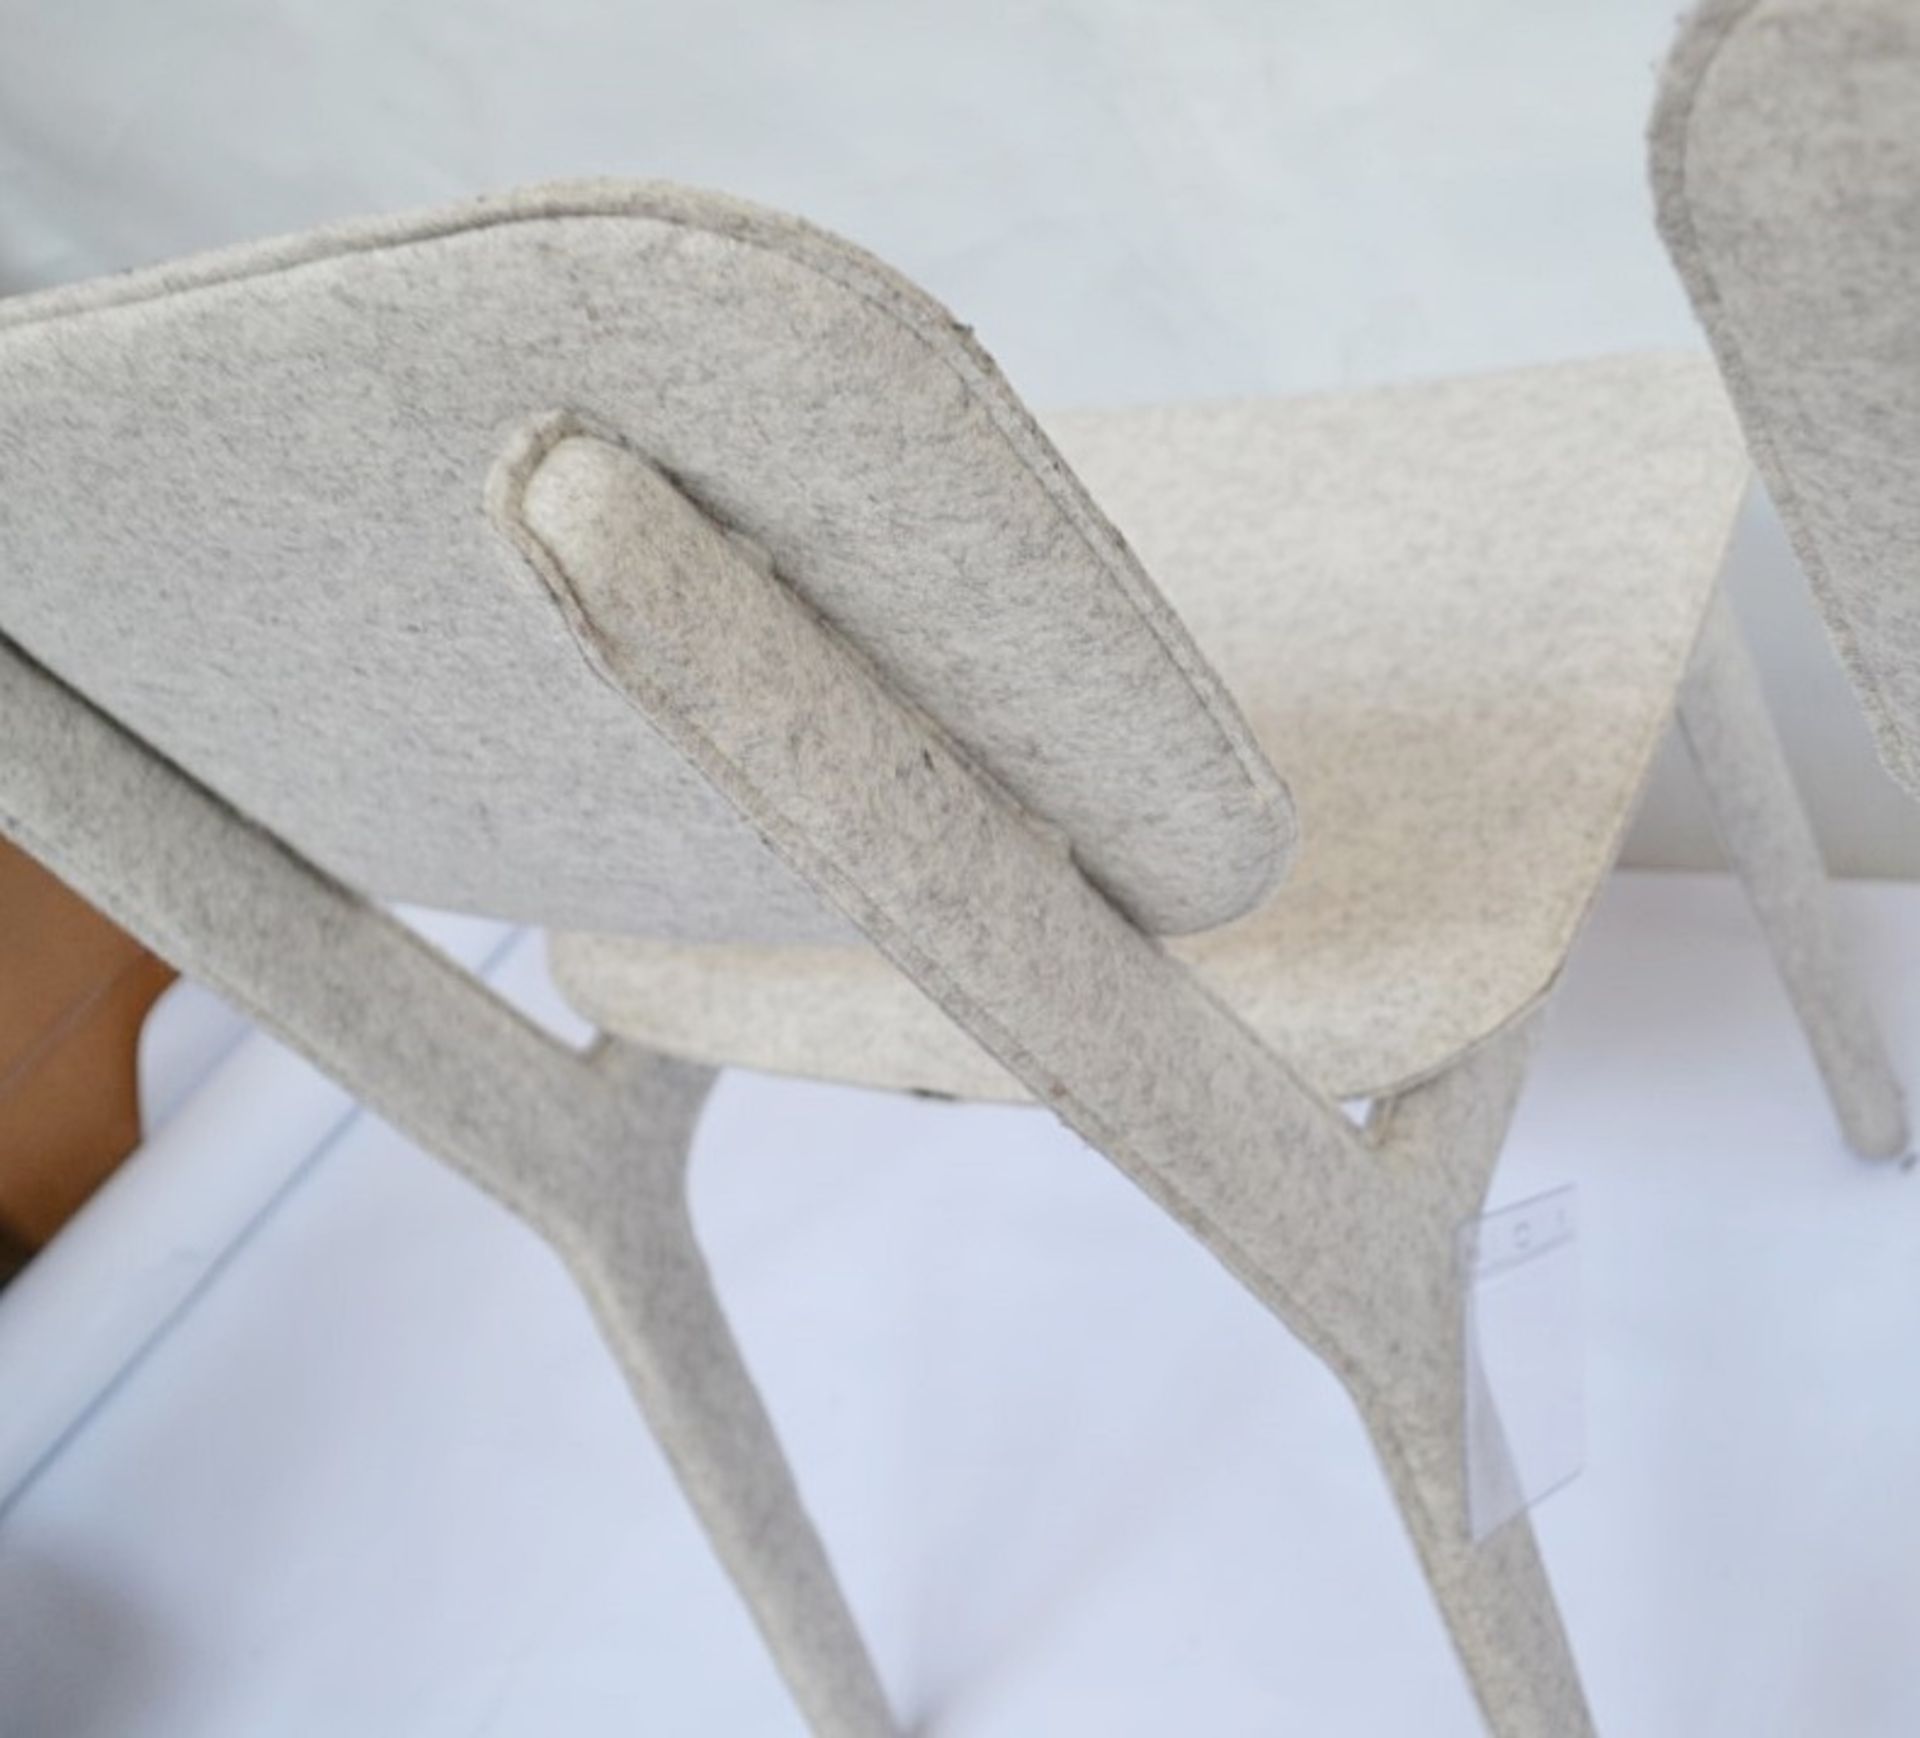 A Pair Of LIGNE ROSET Feutre Nacre "FELT" Dining Chairs In Cream/Grey - Dimensions: H87 x 46 x 46cm, - Image 2 of 8